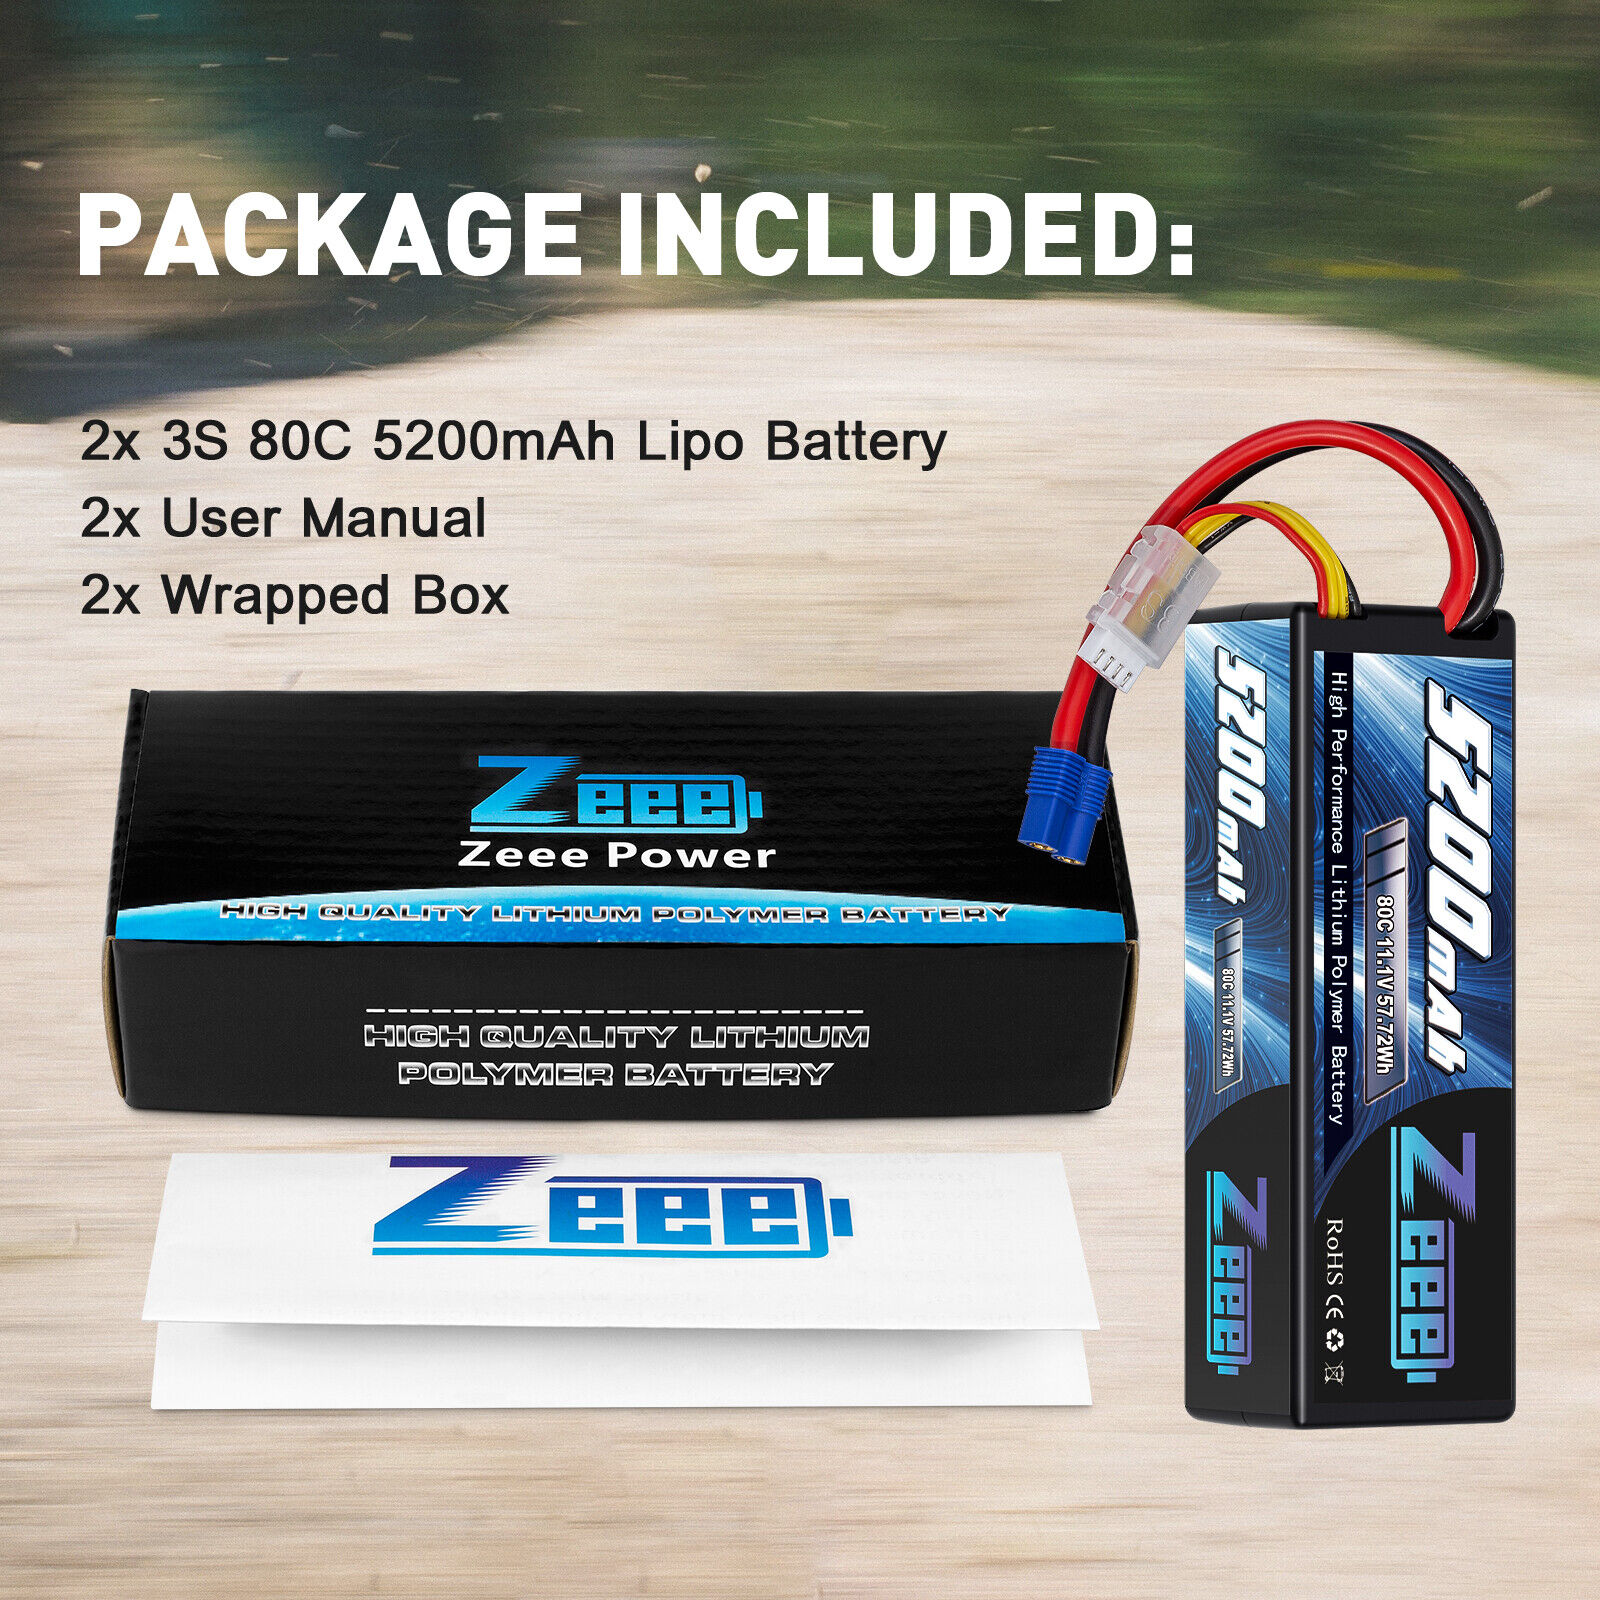 2x Zeee 11.1V 80C 5200mAh EC3 3S LiPo Battery for RC Car Truck Helicopter Buggy ZEEE Does Not Apply - фотография #7